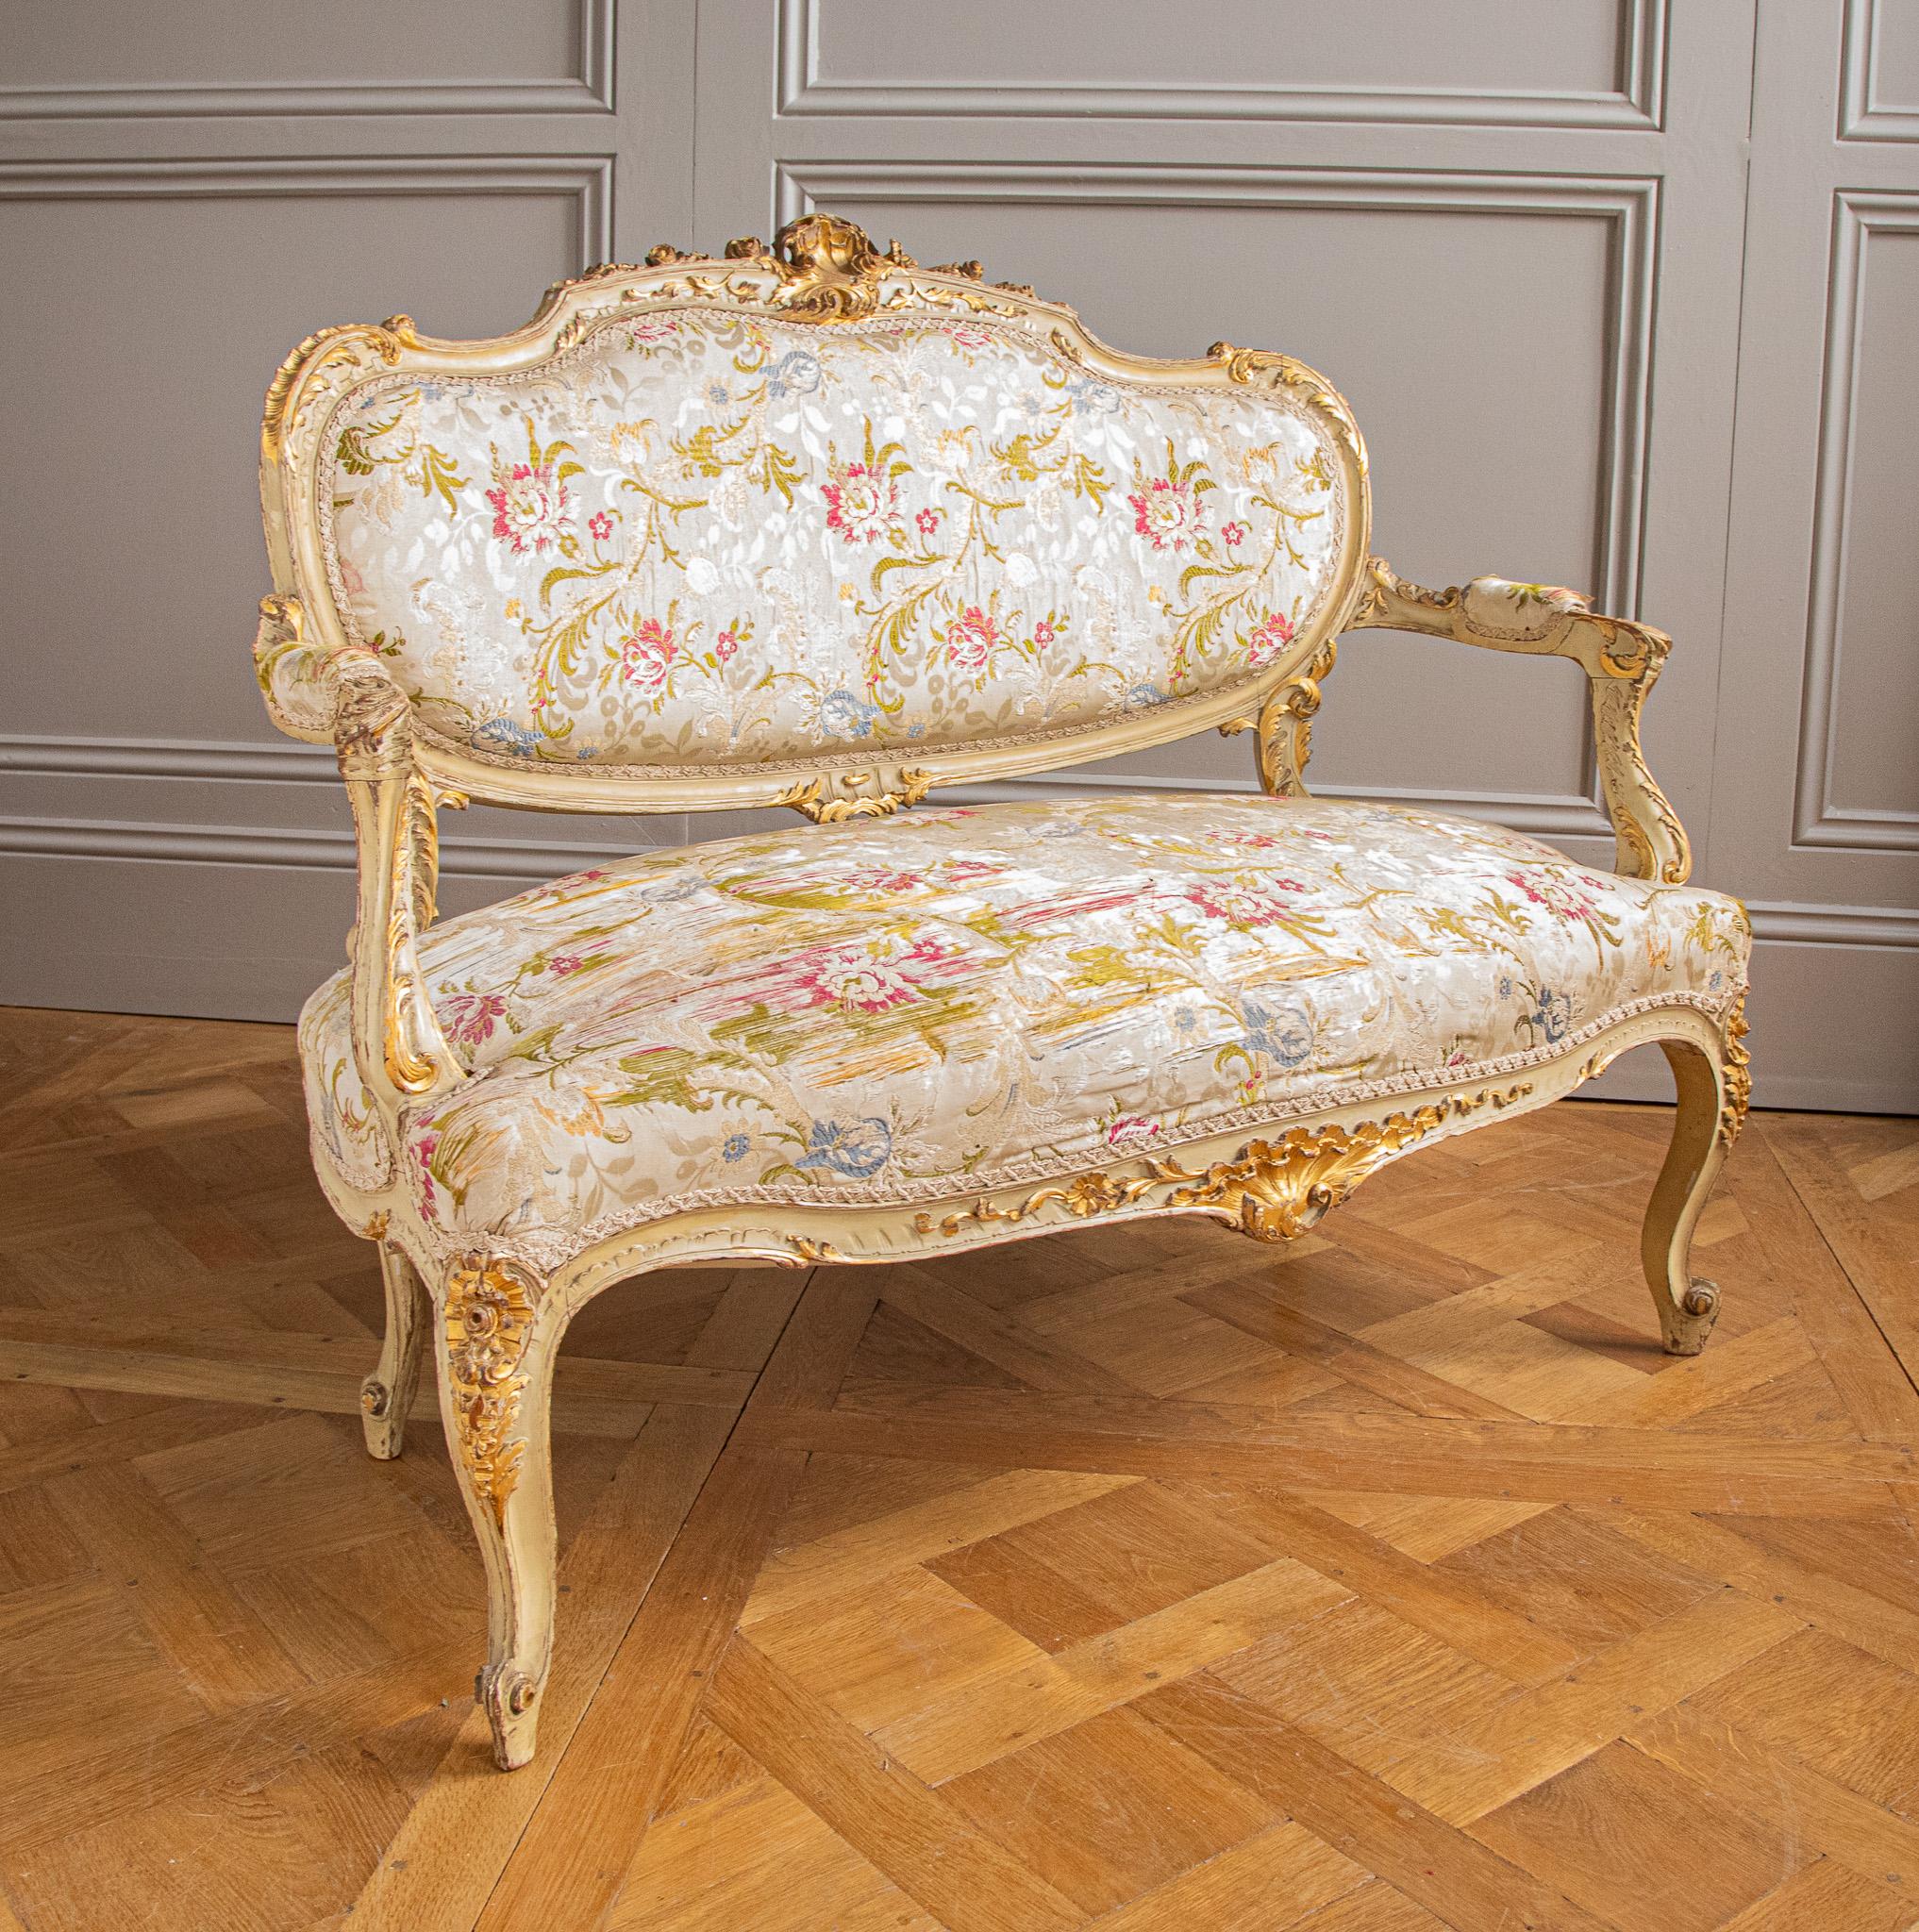 19th Century Italian Carved Gilt-wood Salon Suite - Sofa, Chairs & Footstools  For Sale 9